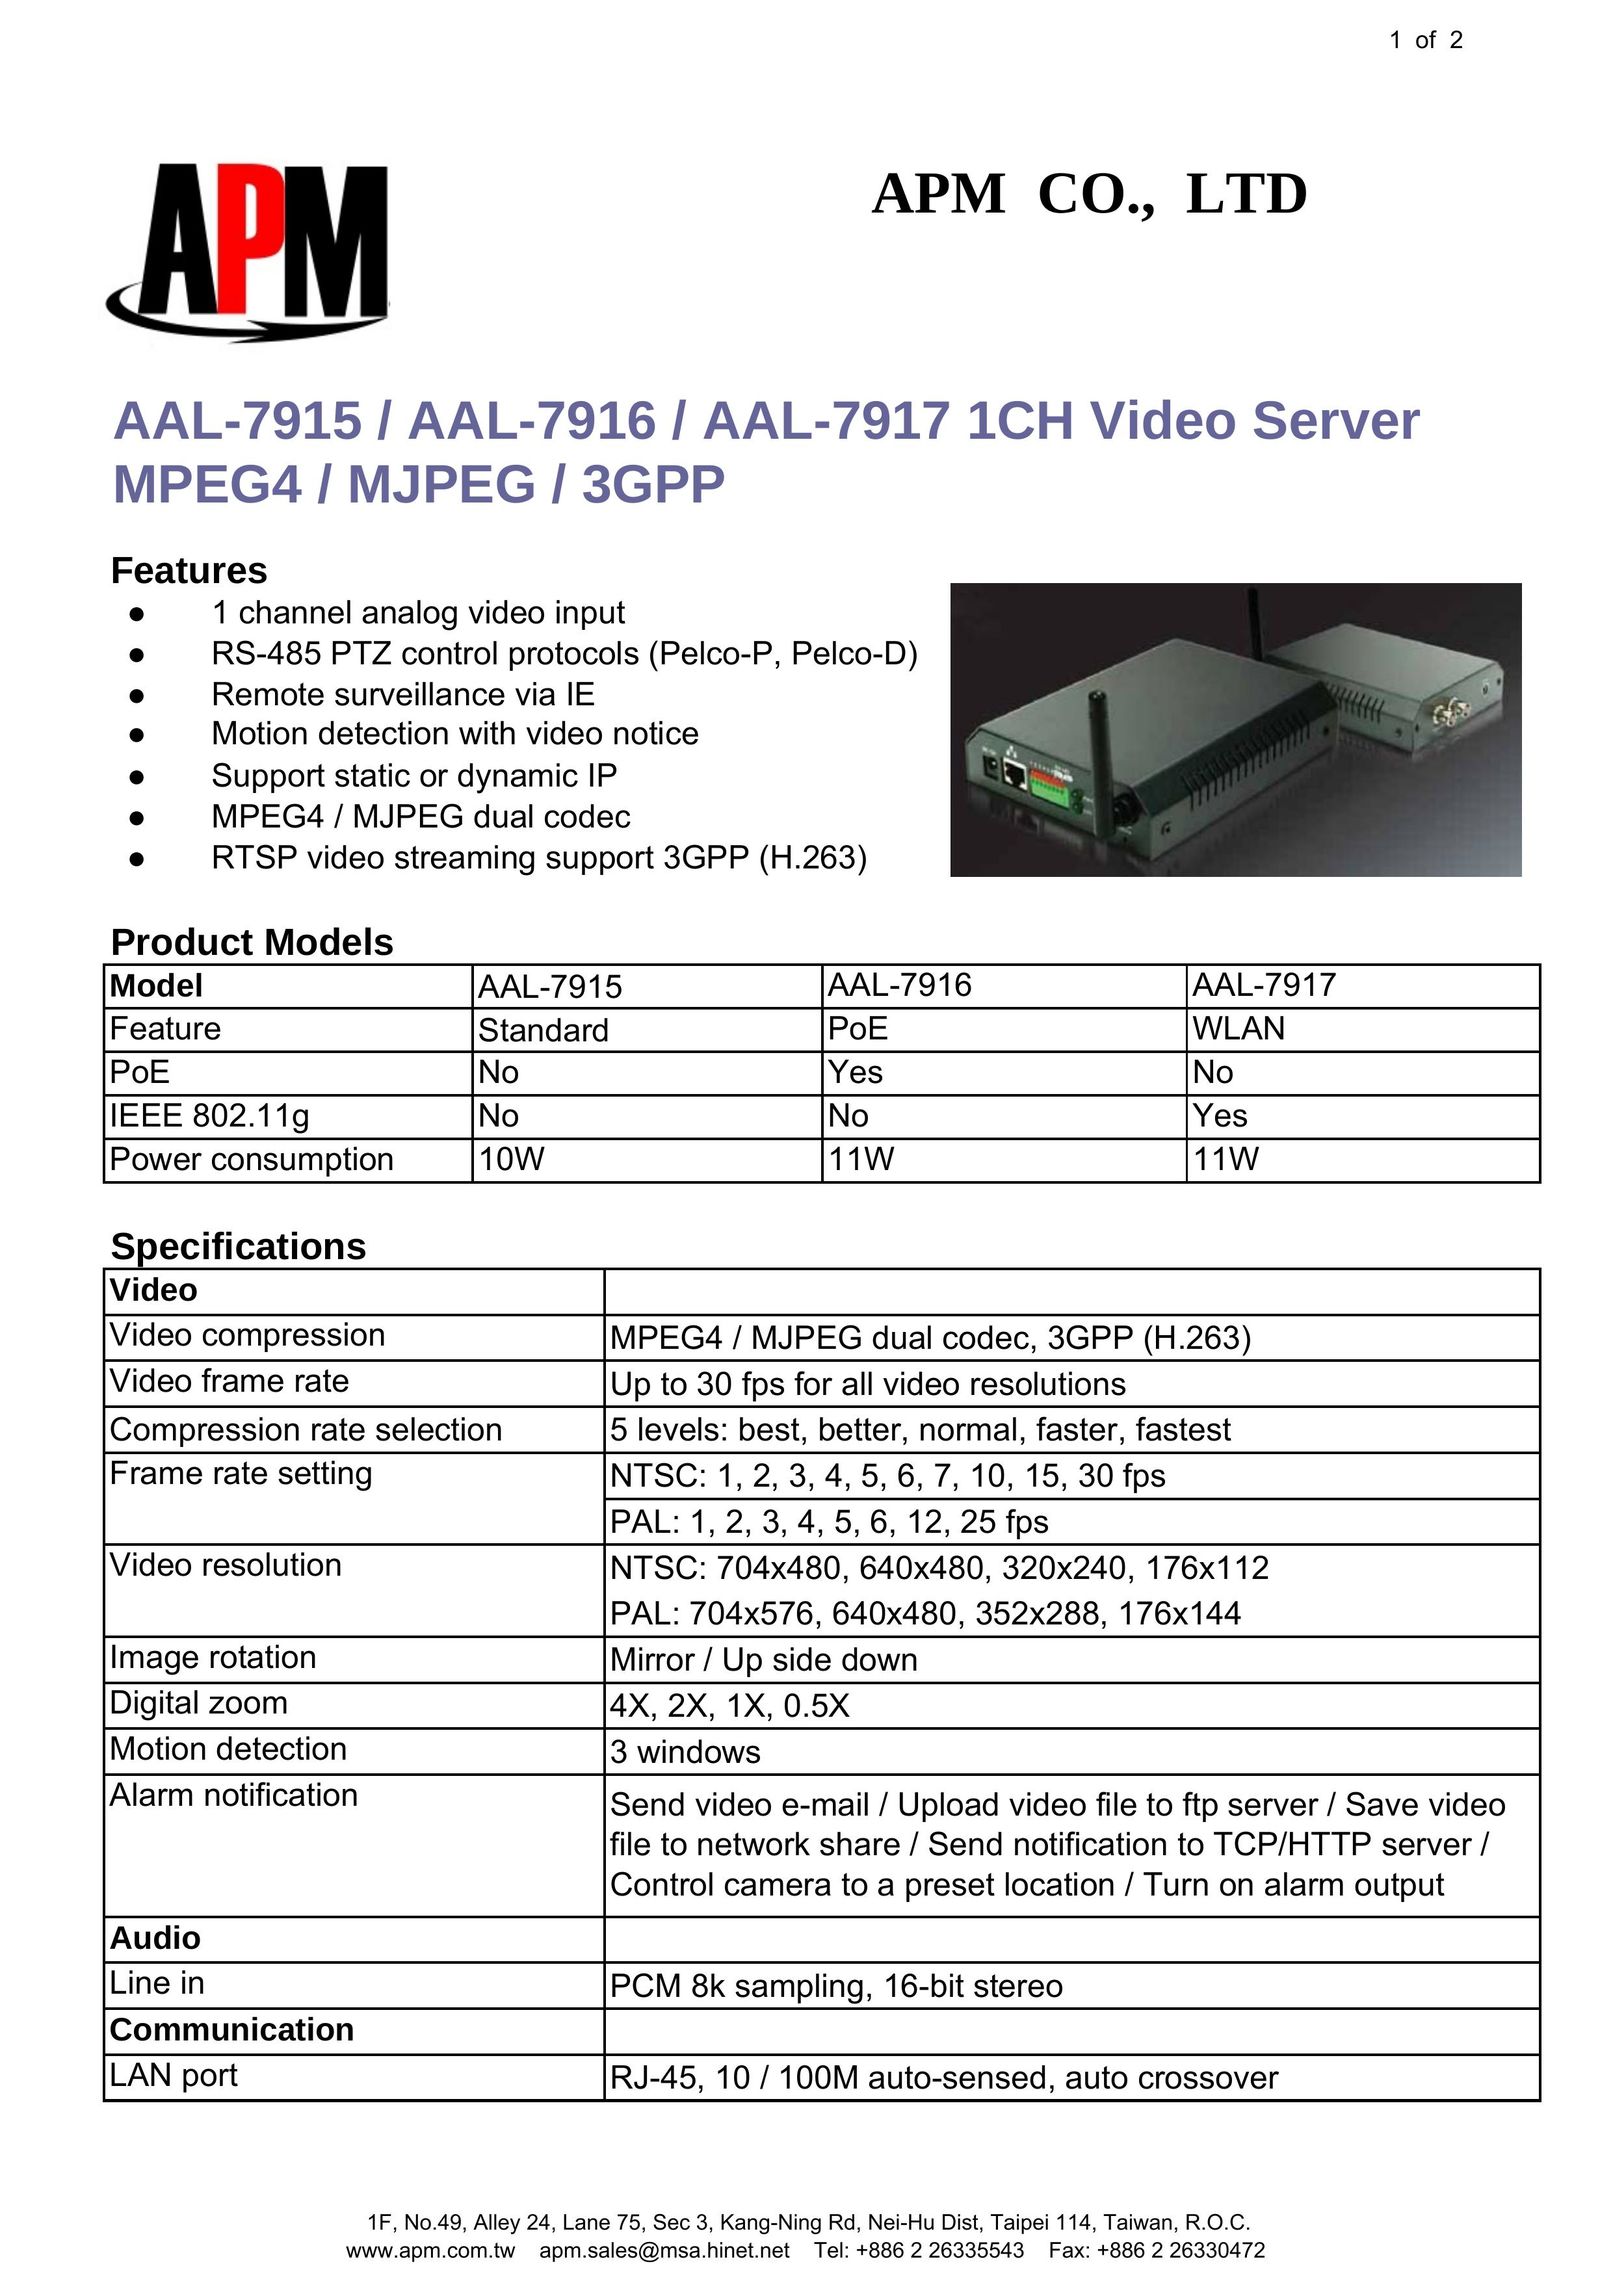 APM AAL-7916 Home Theater Server User Manual